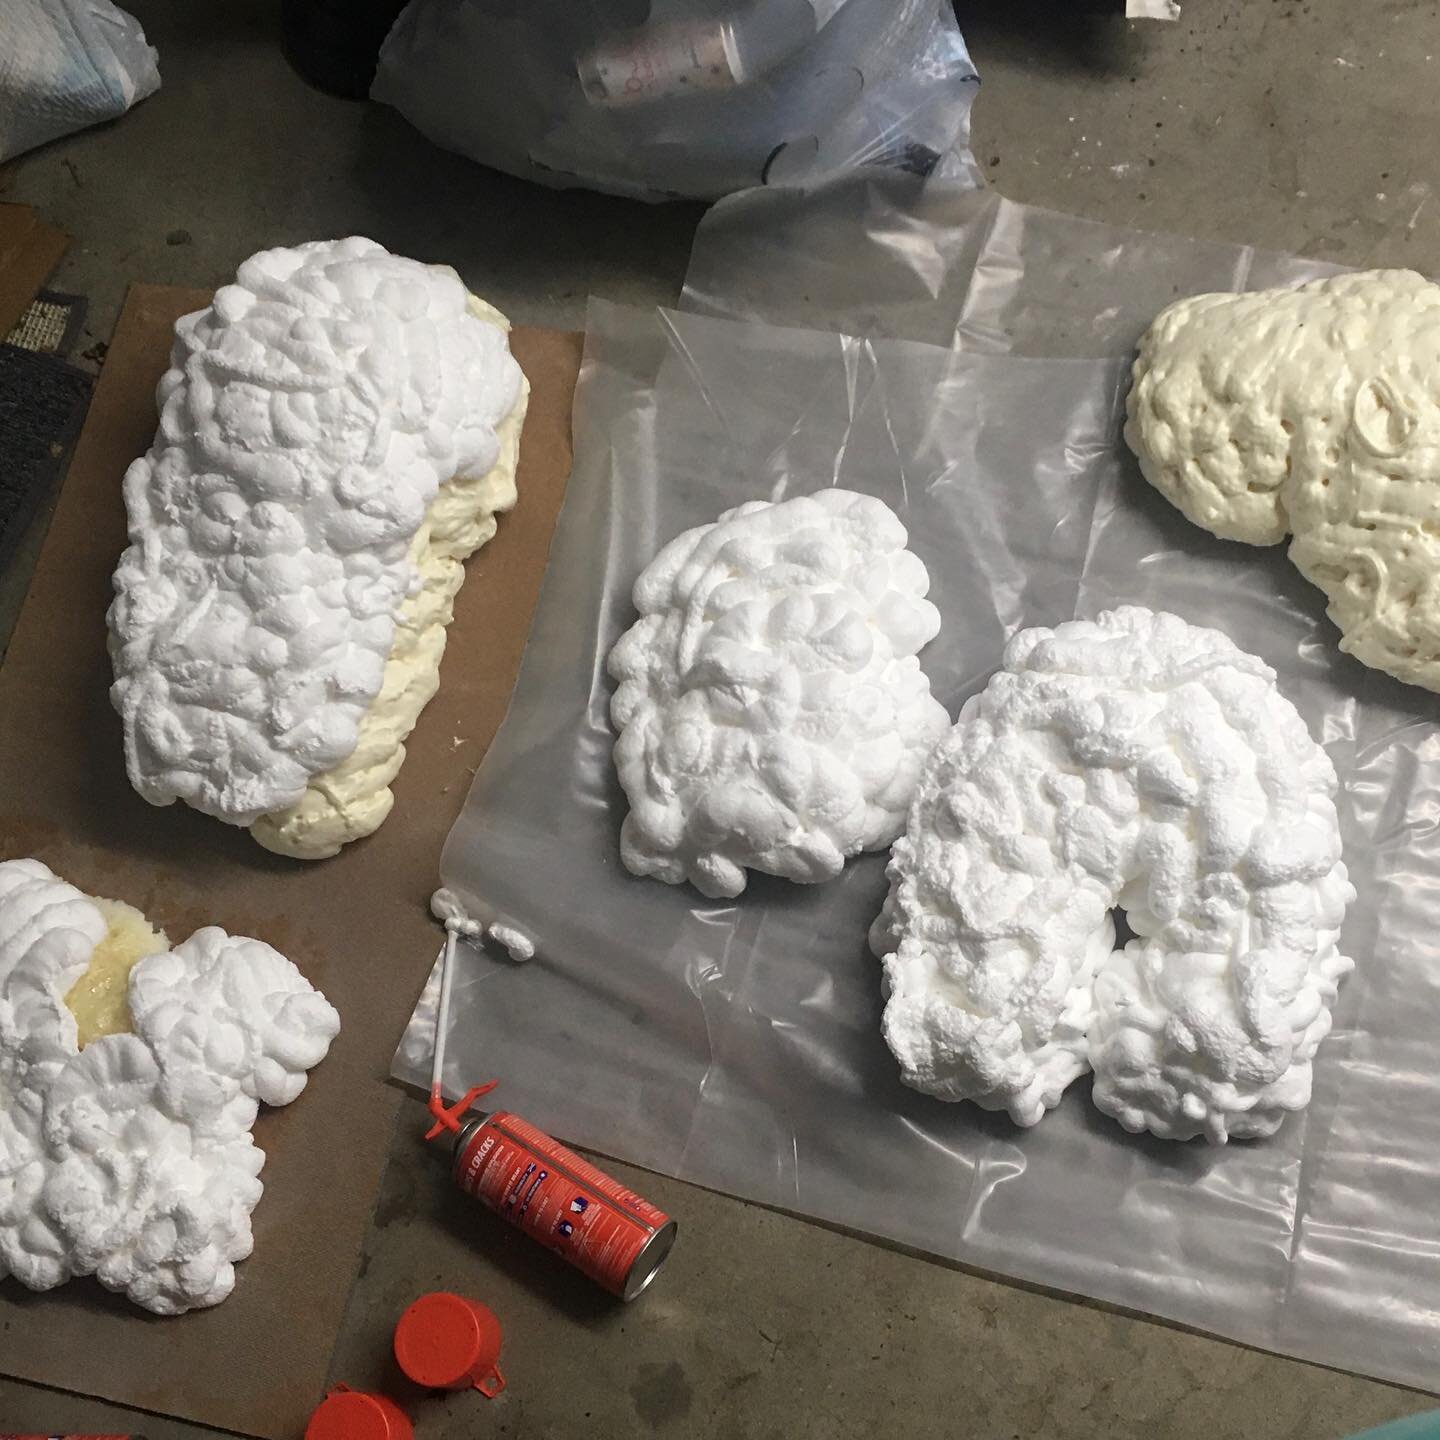 Now that it has been more than a year, it sure feels good to be making something a little messy again! I am massing out the rough forms for the squishy sensors using spray insulation foam, aka &ldquo;Great Stuff&rdquo; (which admittedly is just ok, I